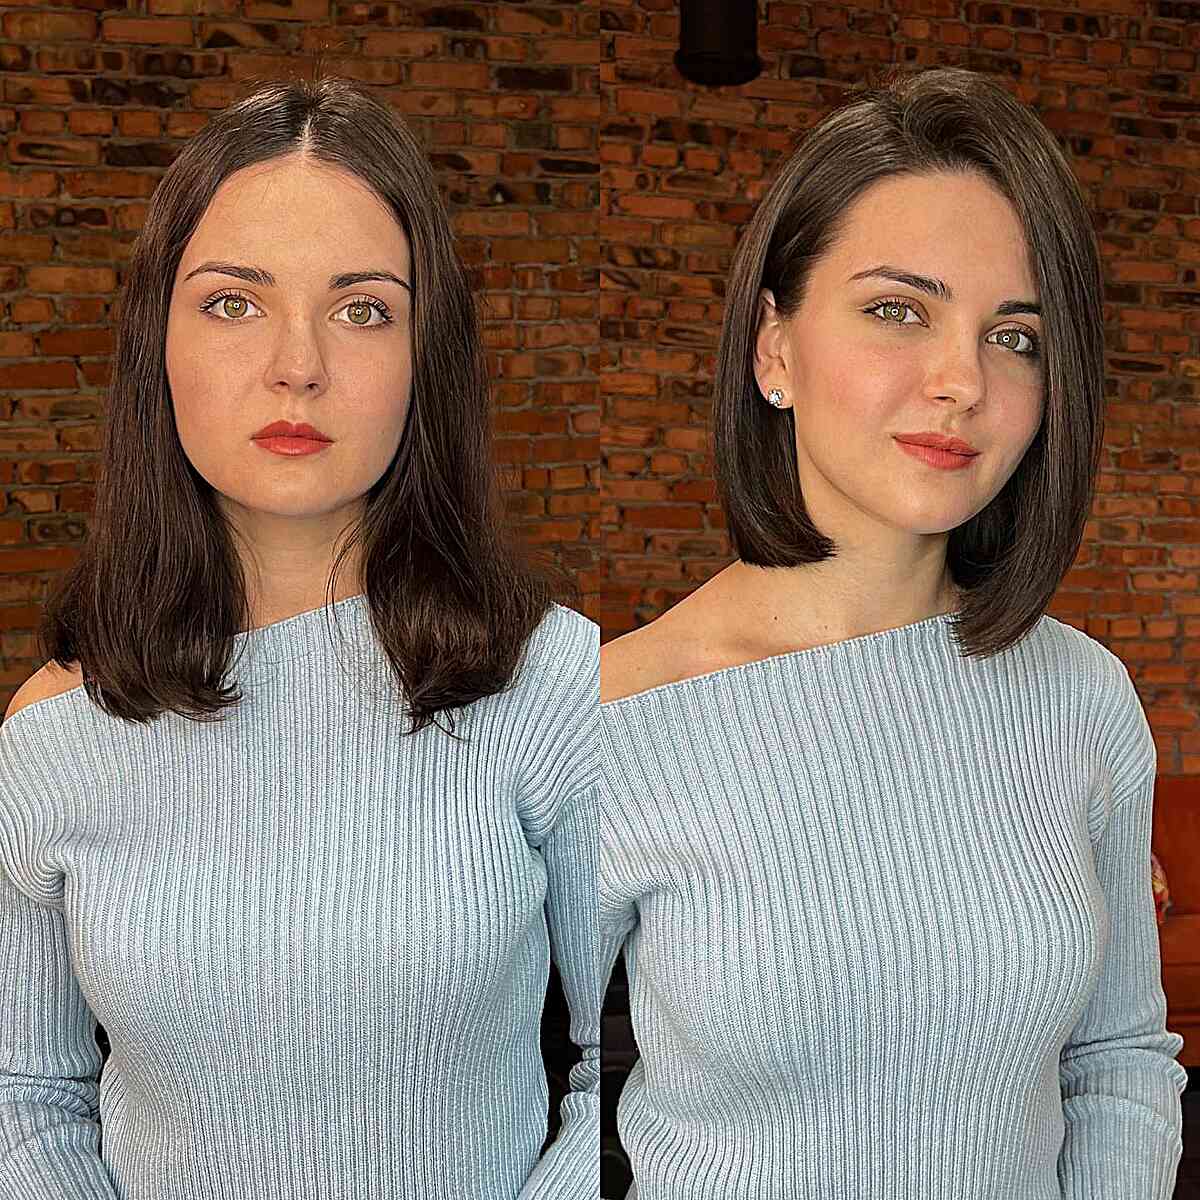 Asymmetric Straight Bob Cut with a side part and no bangs